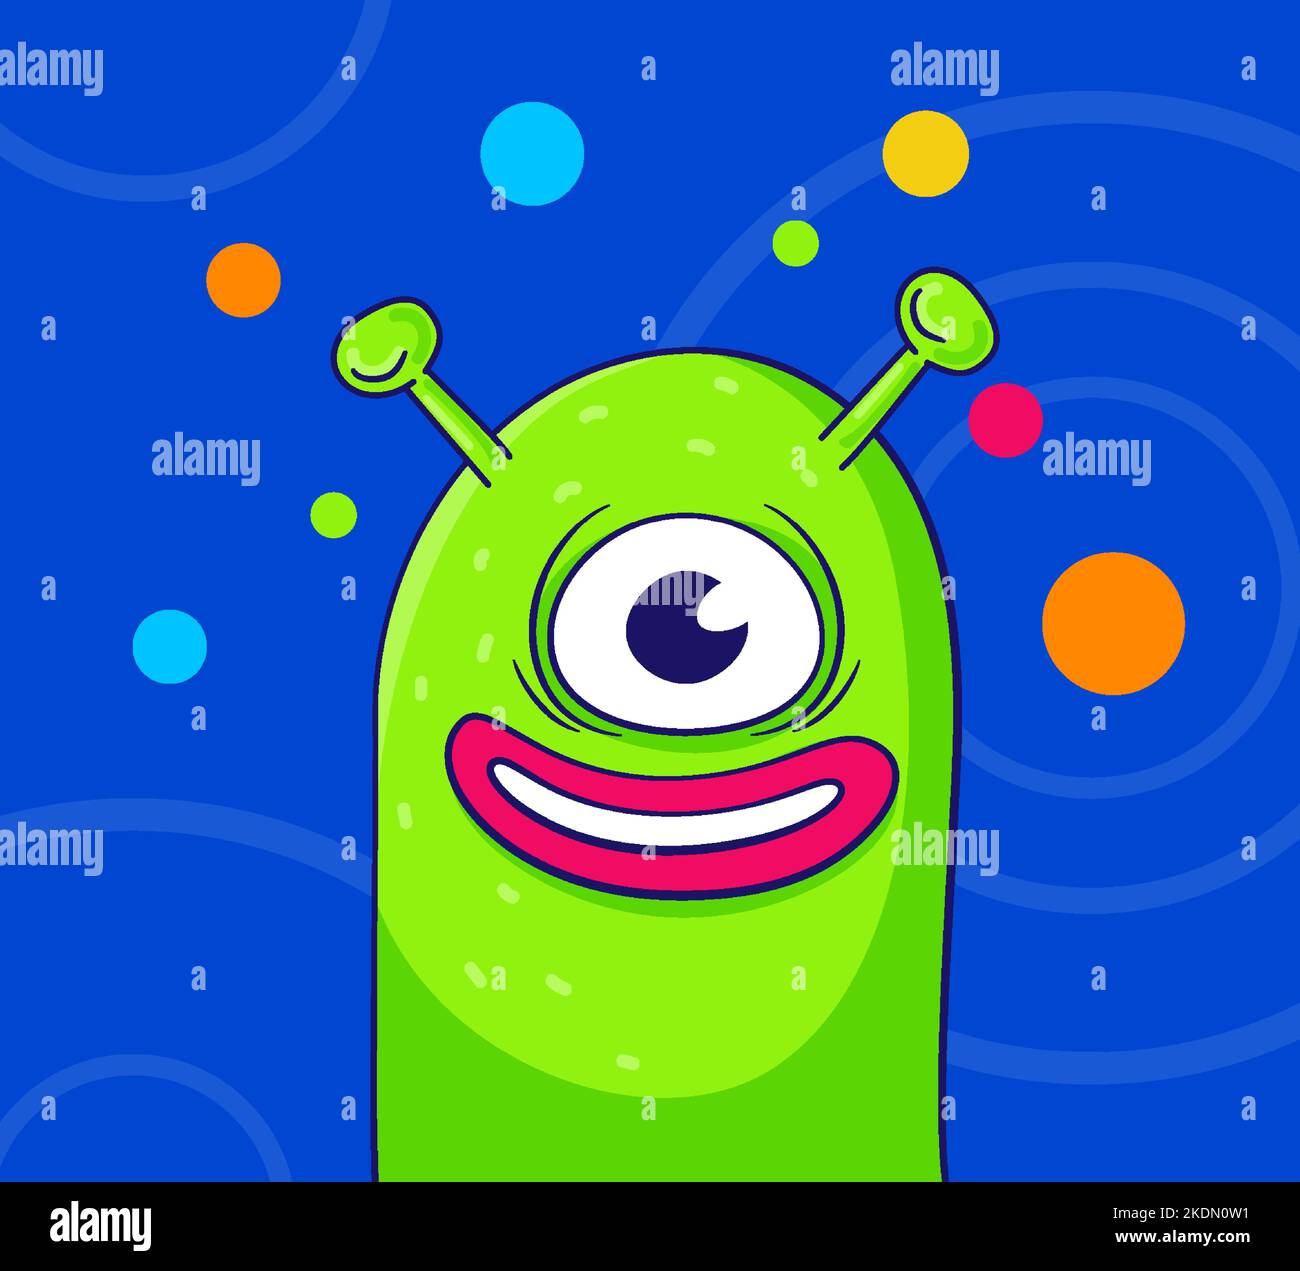 Retro sticker cartoon green alien with one eye, peeking out smiling with mouth wide open on blue space background. Planets, stars, space, hipster Stock Vector